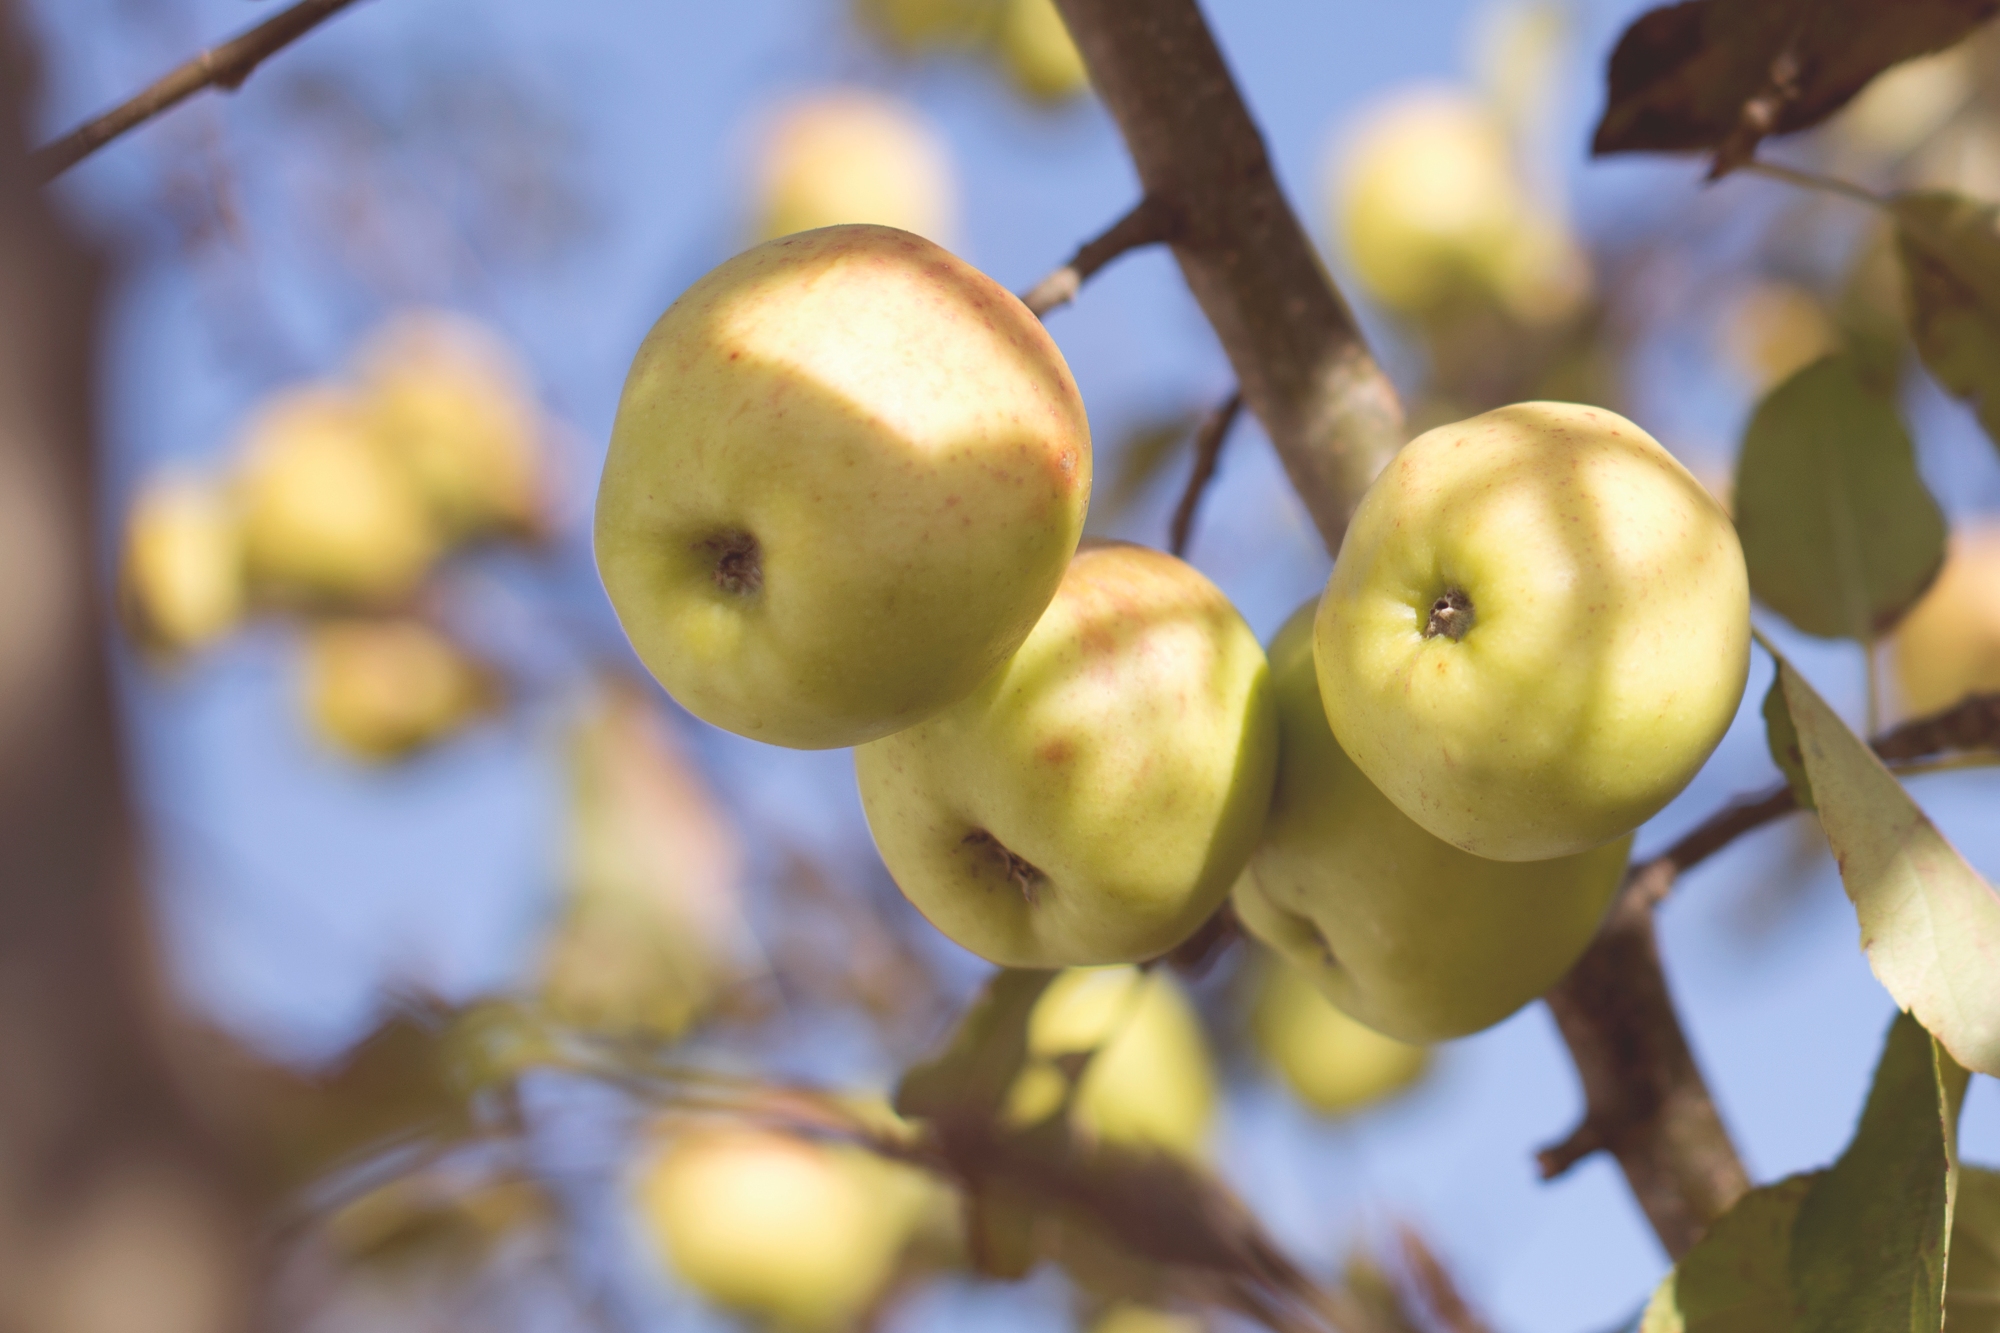 Throw Out the Bad Apples | The Cheerful Times